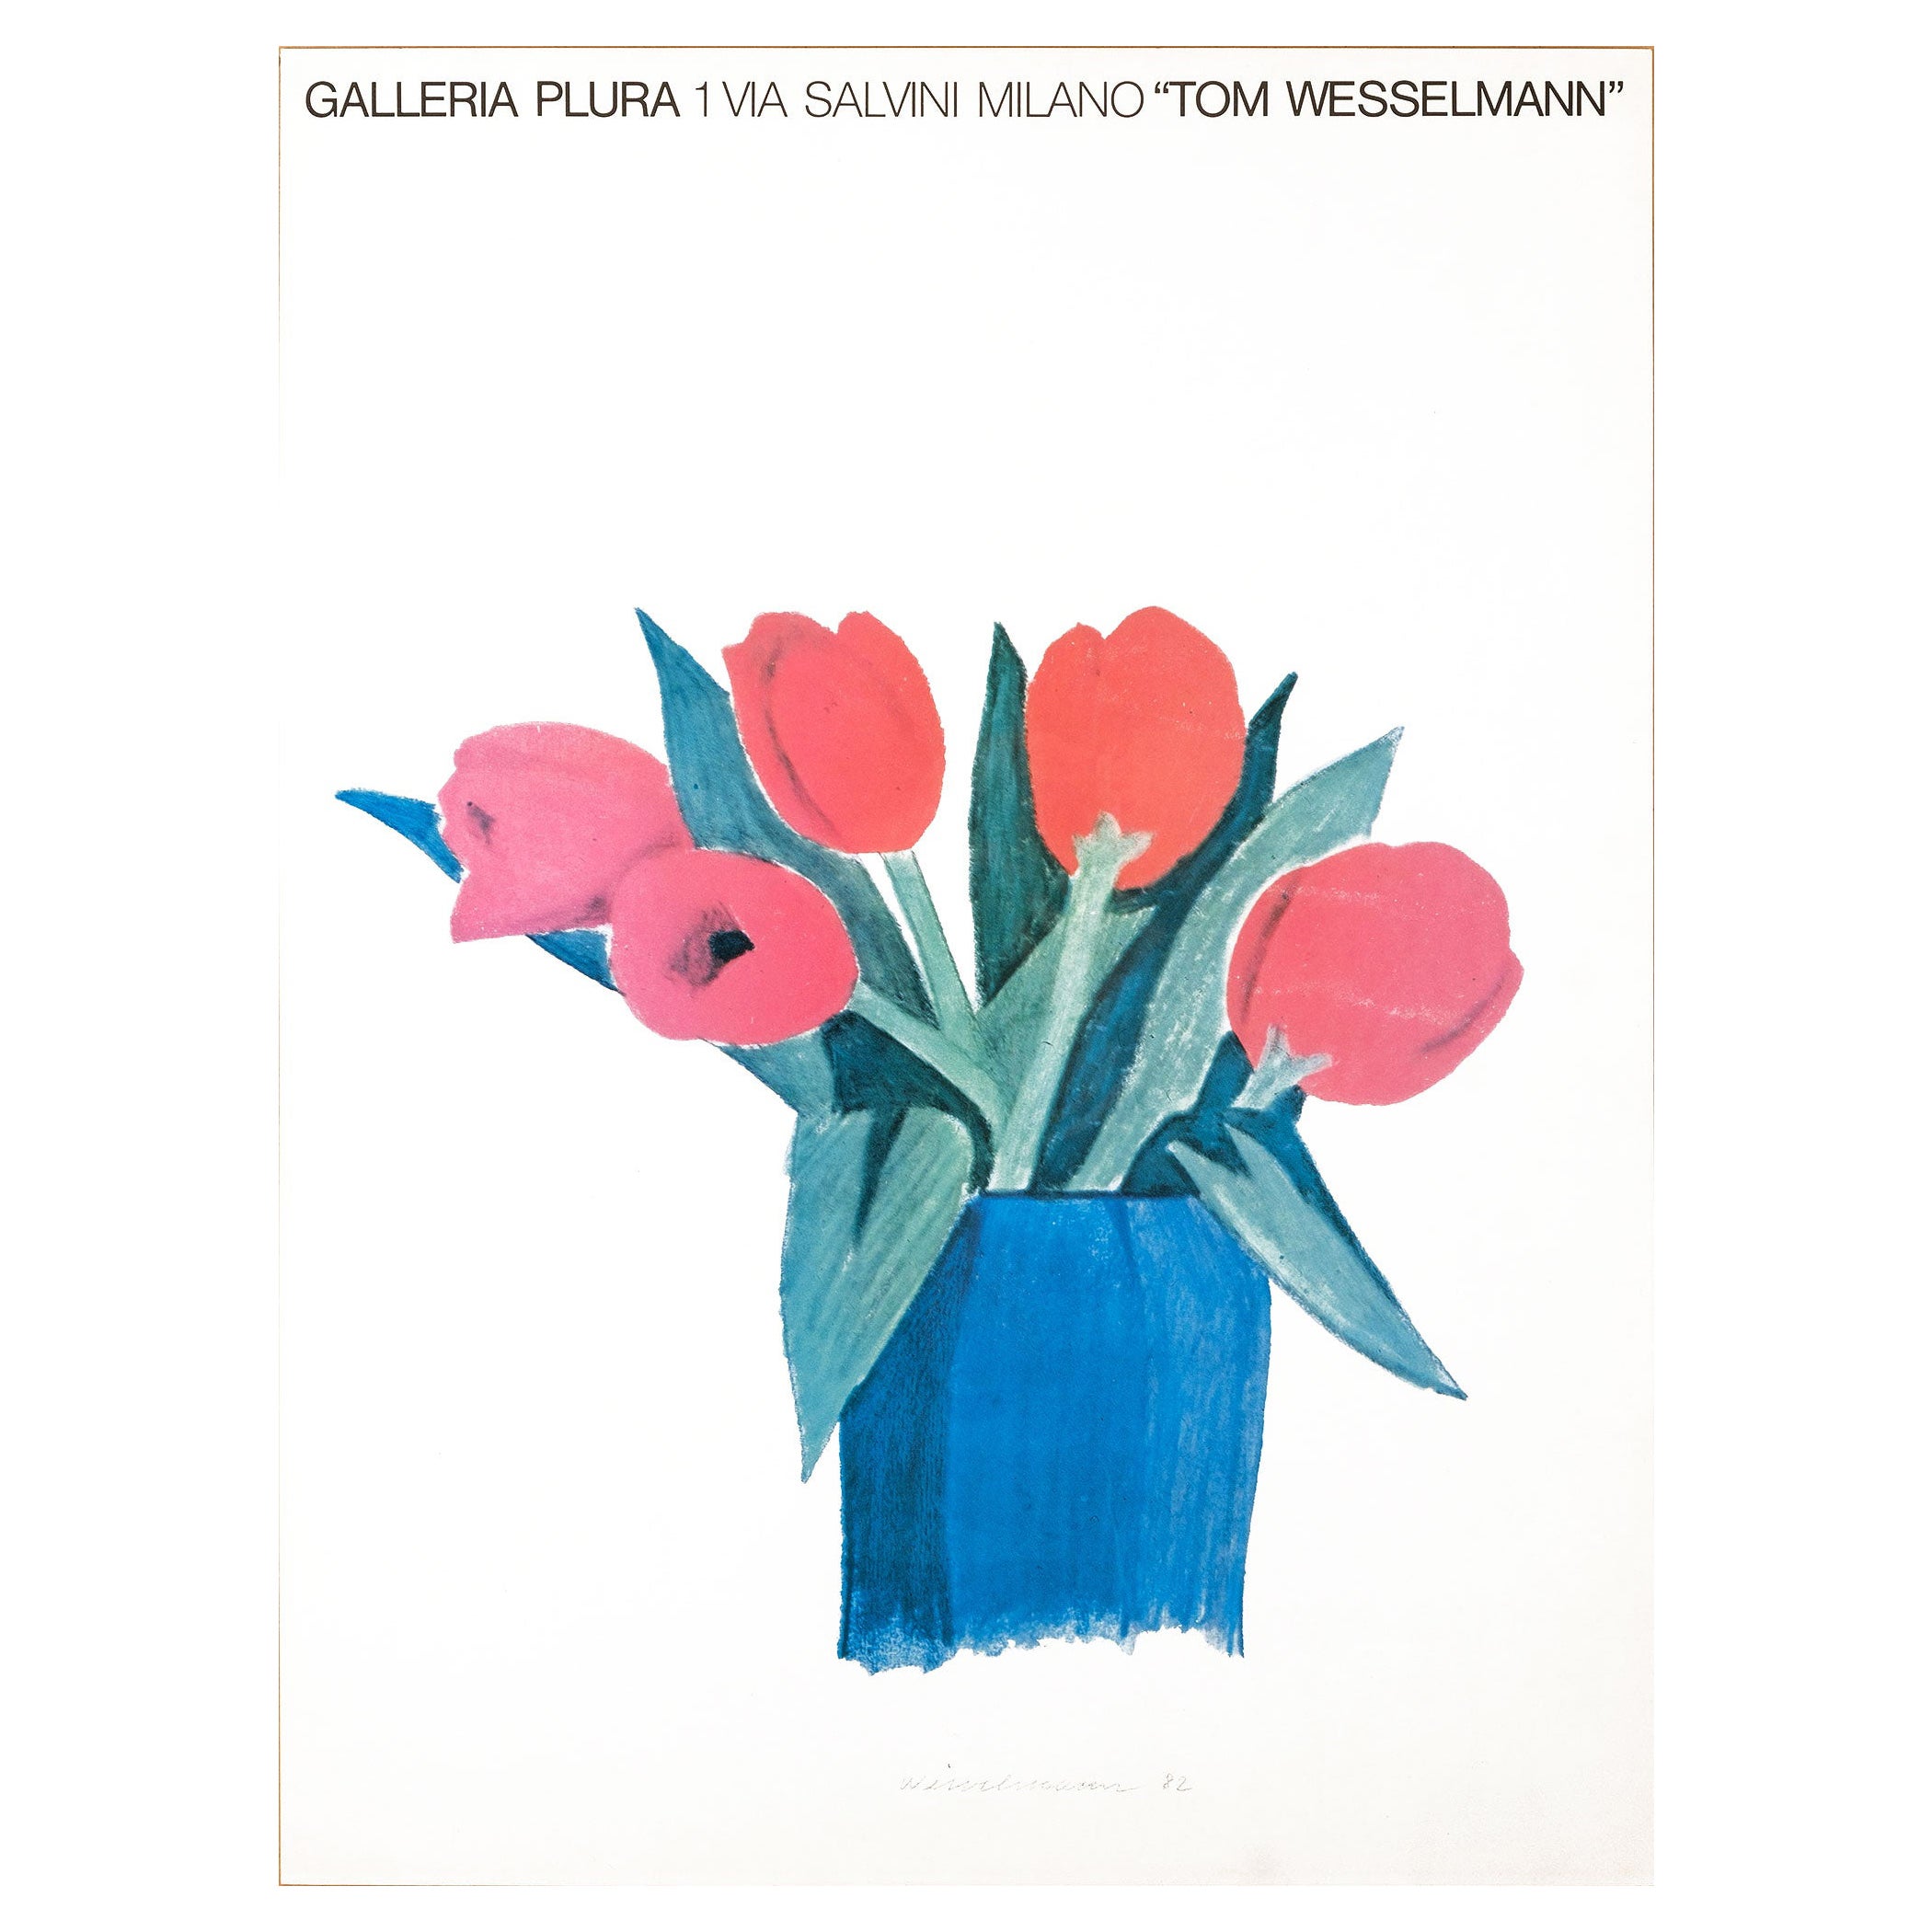 Original Print of the First Italian Tom Wesselmann Exhibition, Galleria  Plura For Sale at 1stDibs